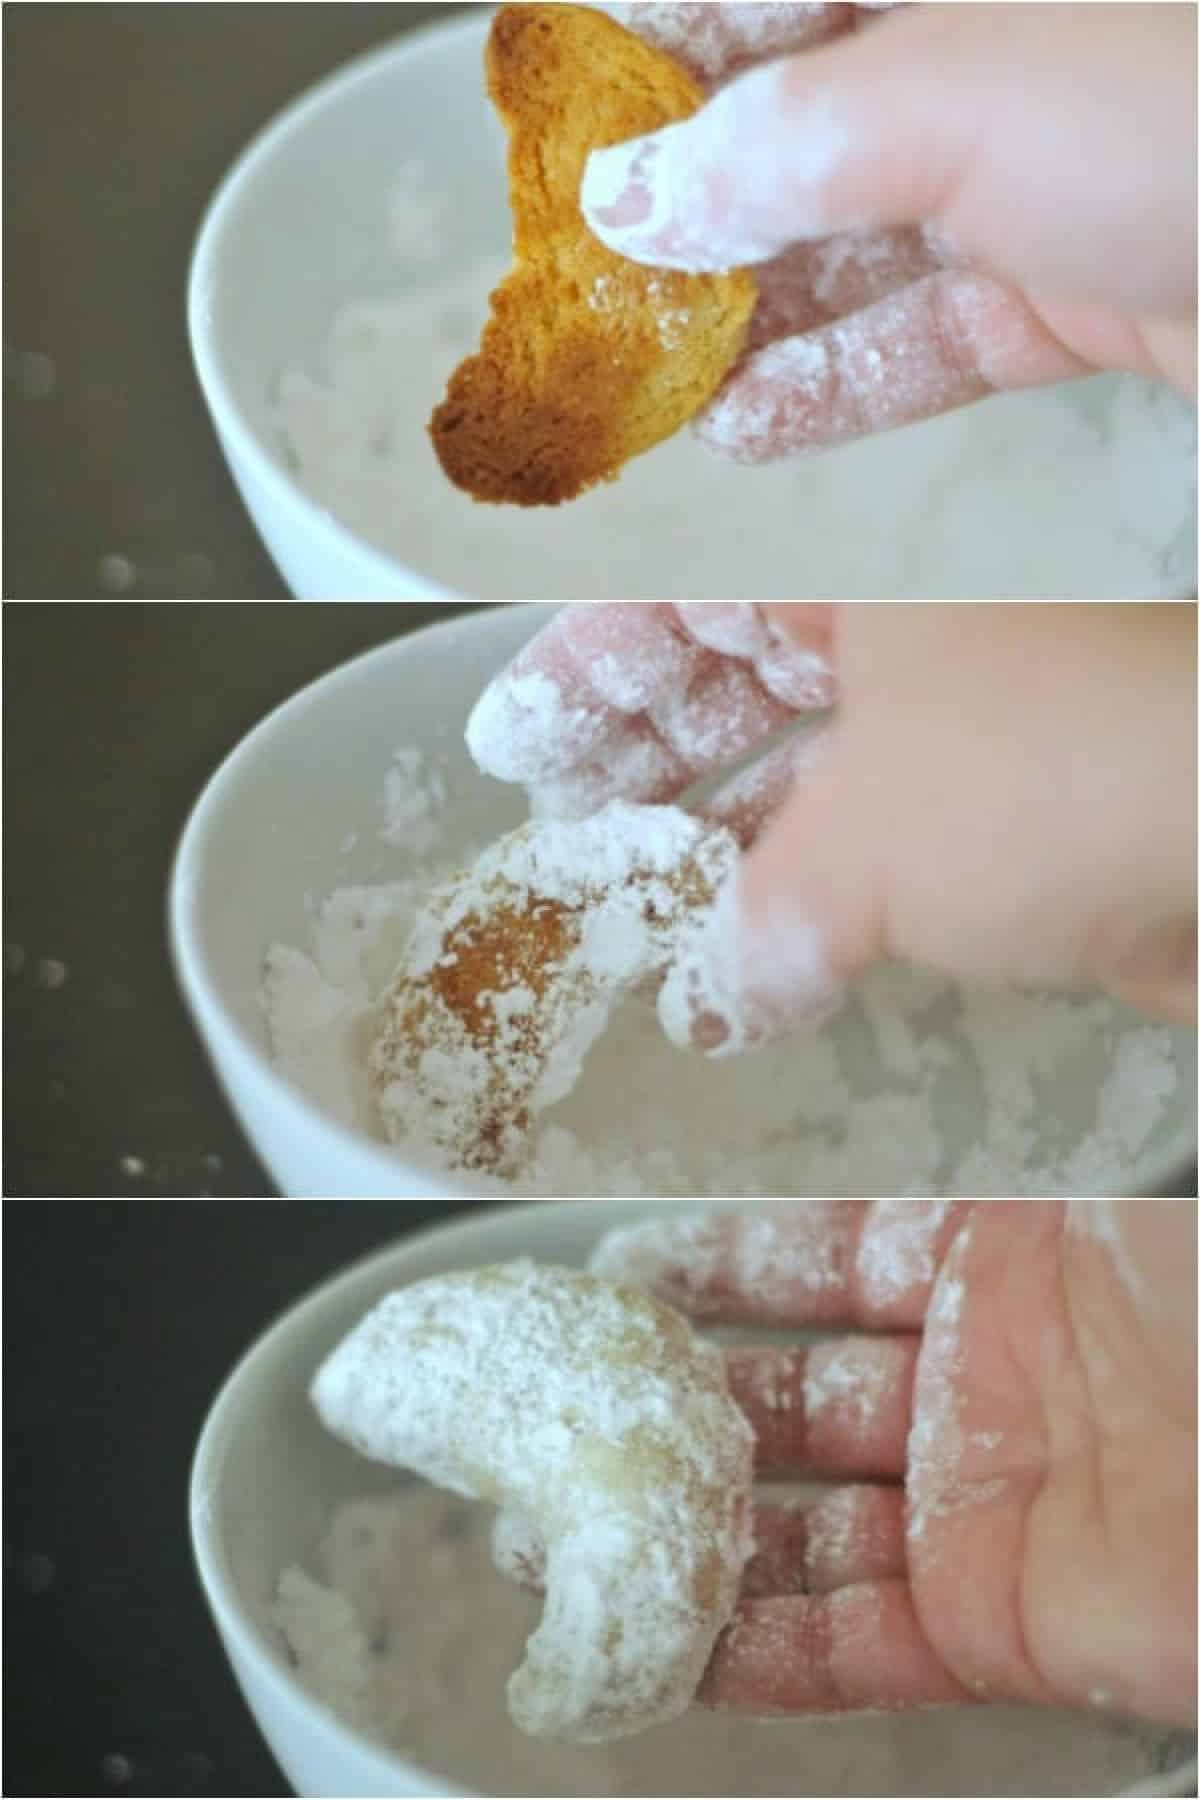 Three photo collage showing a hand dipping a crescent cookie into powdered sugar.